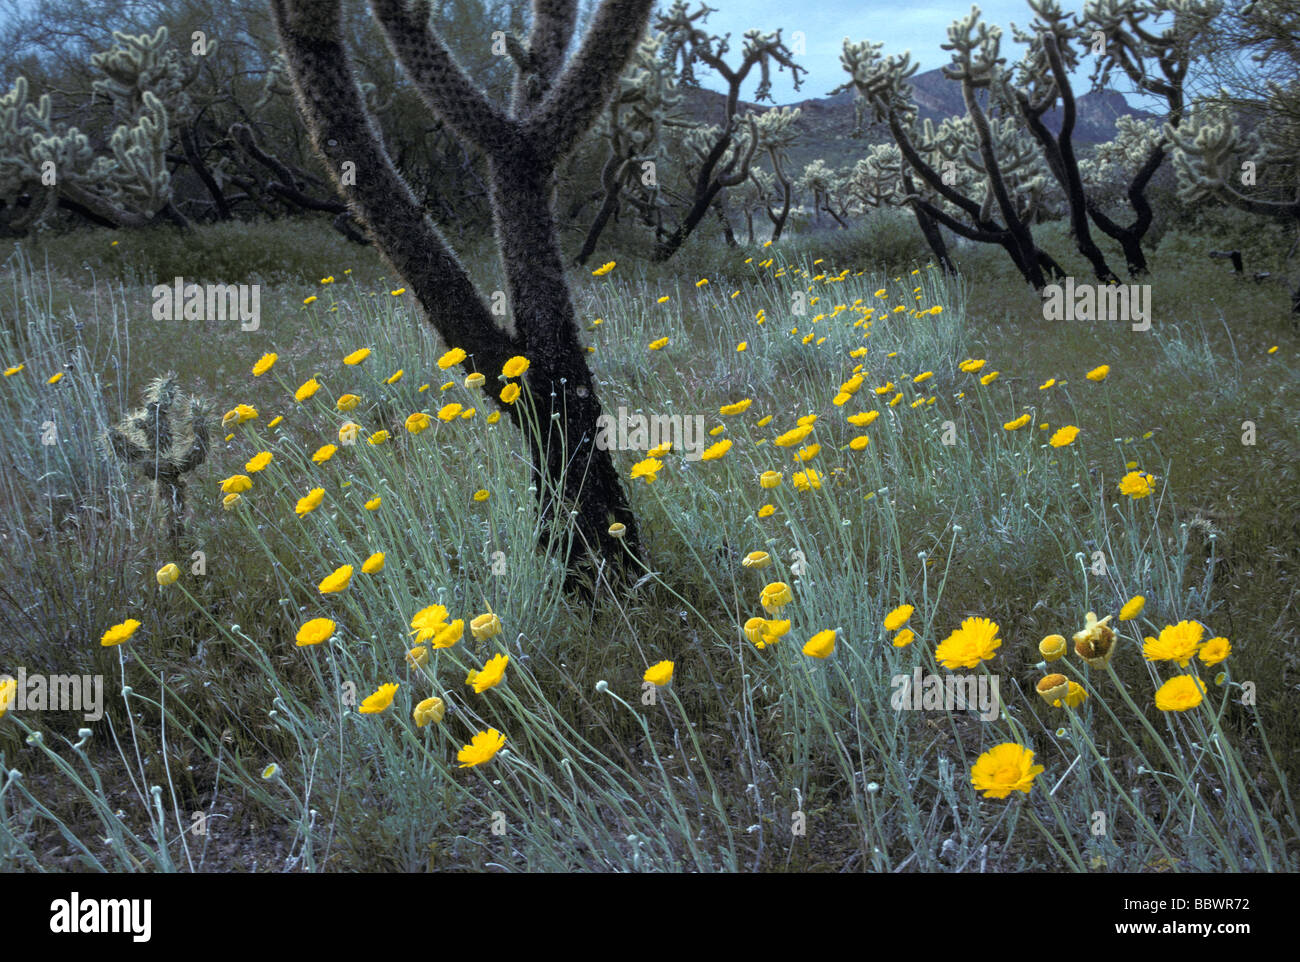 A forest of cholla cactus in the Superstition Mountains of central Arizona Stock Photo